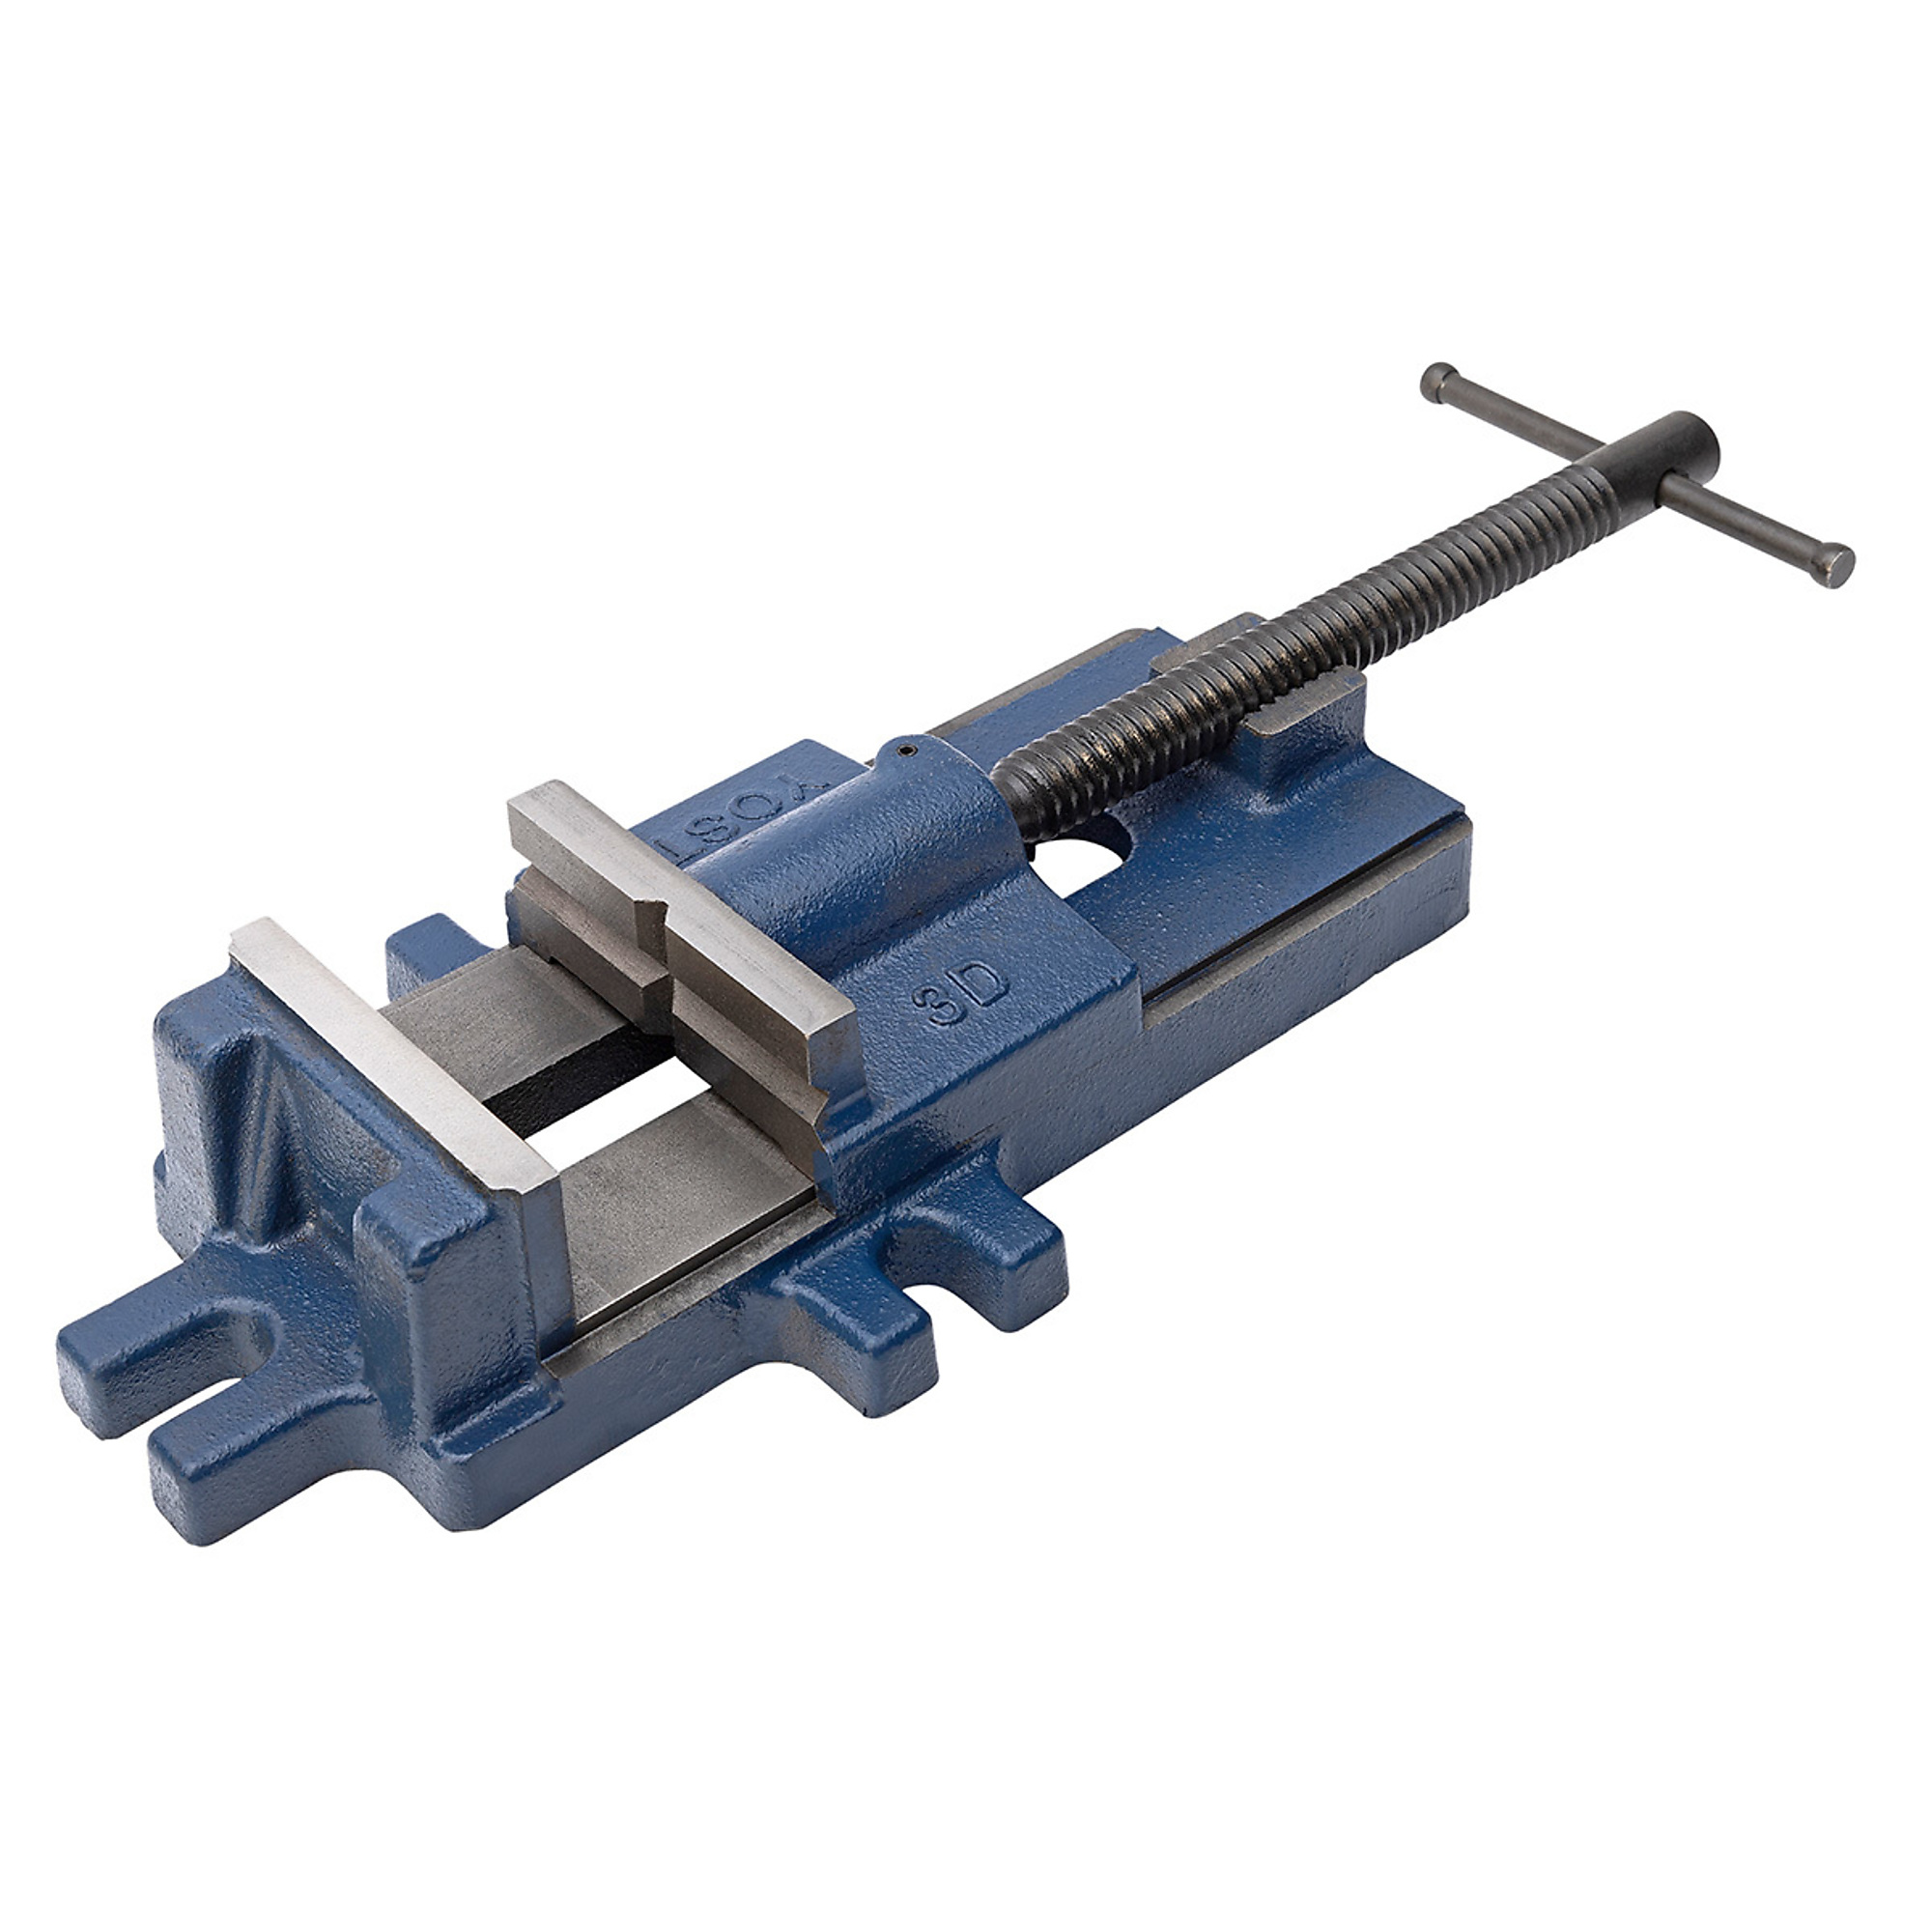 Yost Vises, 3Inch HD Drill Press Vise, Jaw Width 3.5 in, Jaw Capacity 4 in, Material Iron, Model 3D-QR -  56479